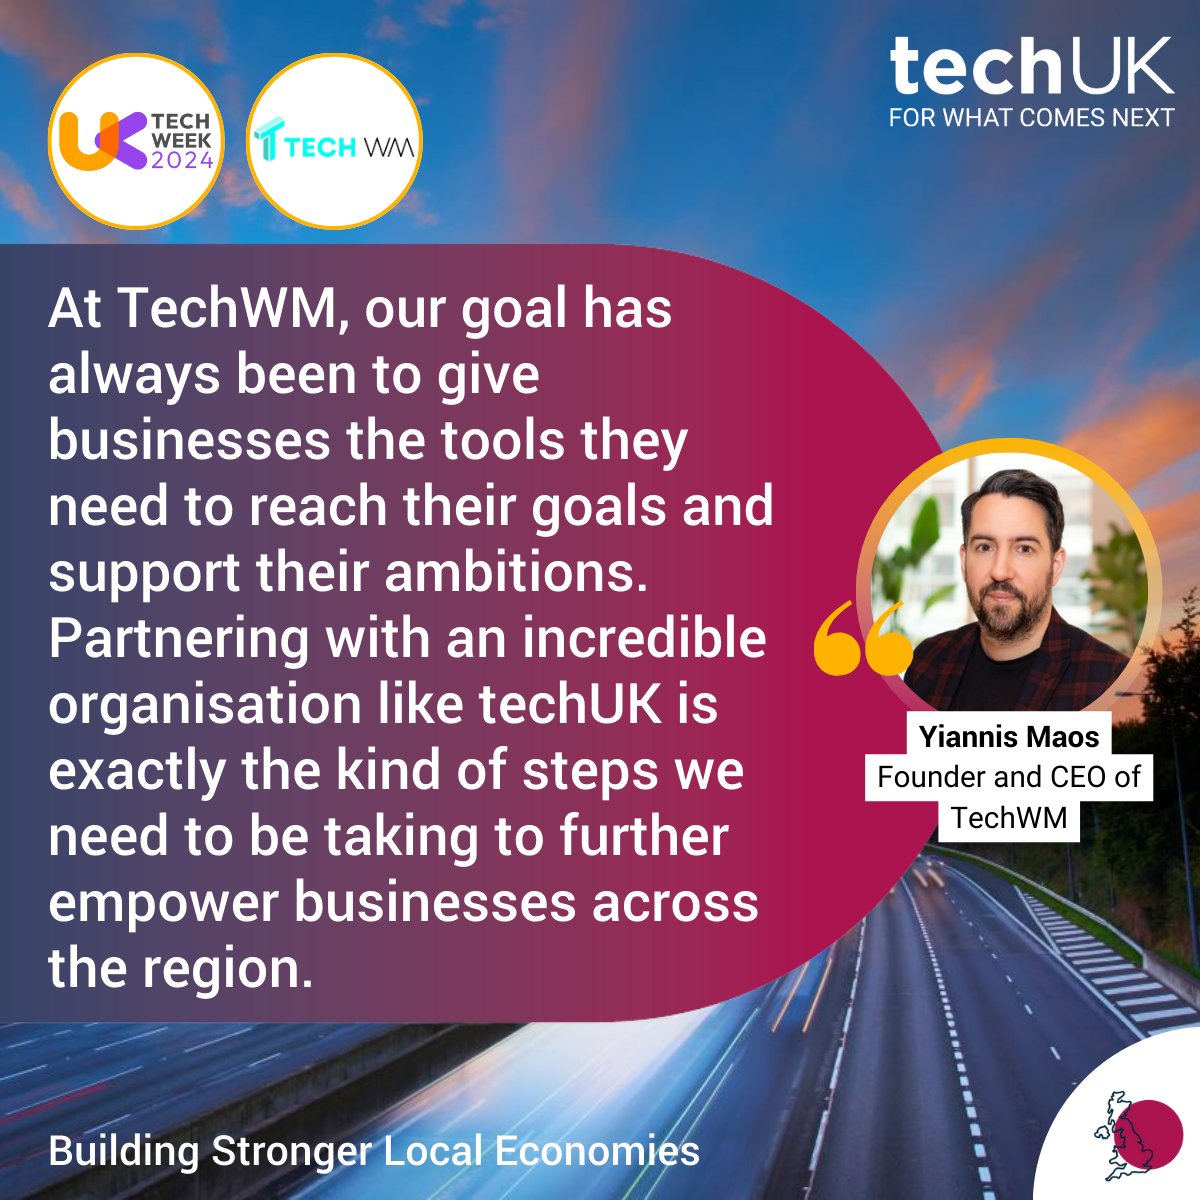 🎉 We are excited to announce our new techUK and TechWM strategic agreement! Read more below and get involved with our activities 👇 techuk.org/resource/techu…